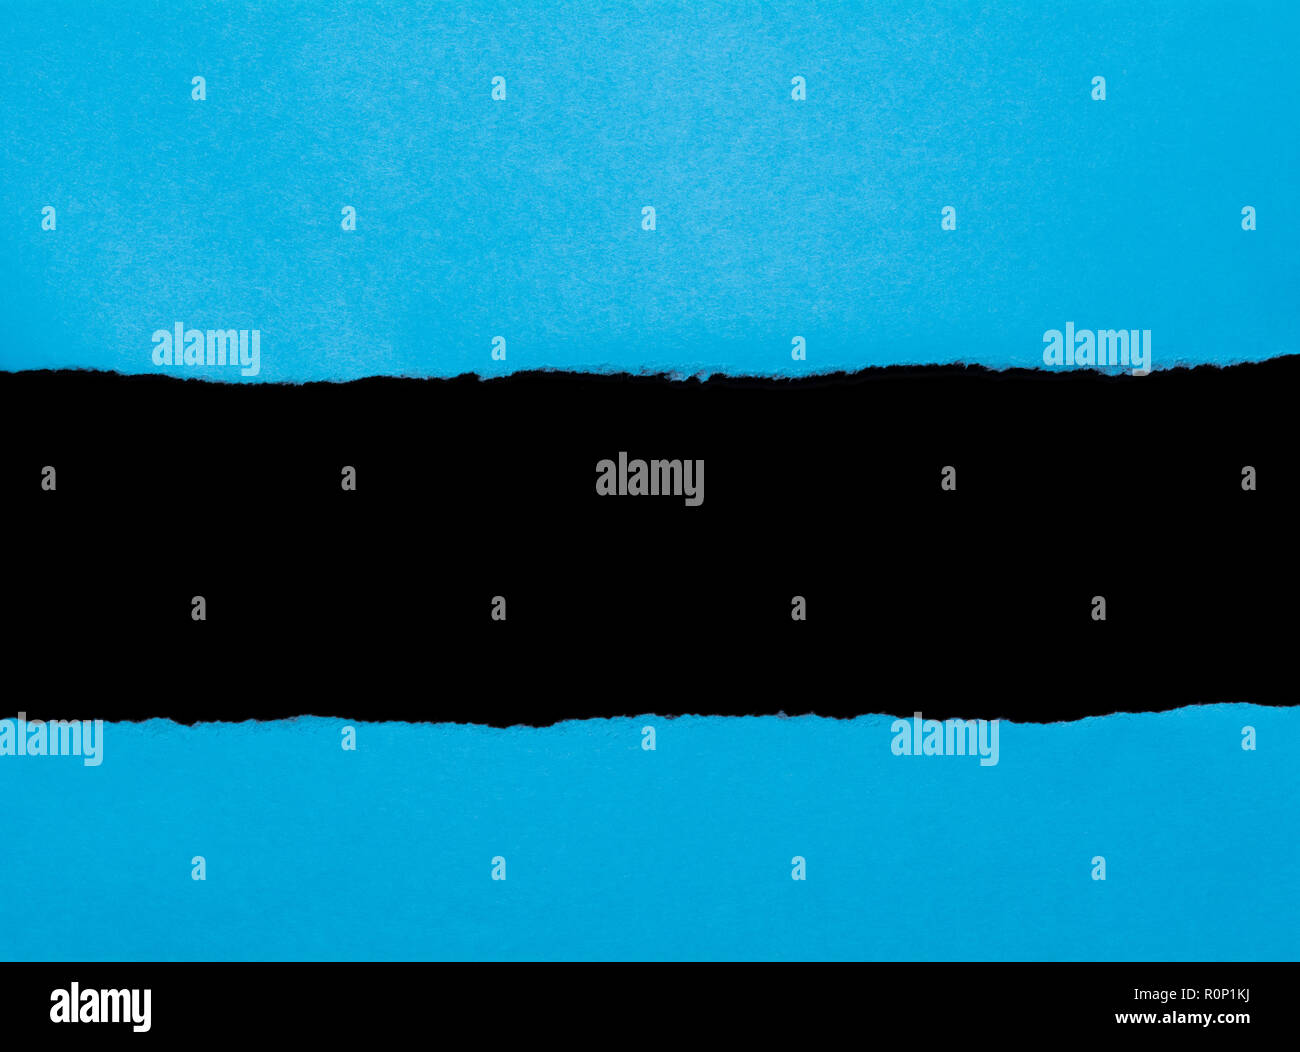 Blue torn paper with opening black space for text. Paper scroll background. Stock Photo